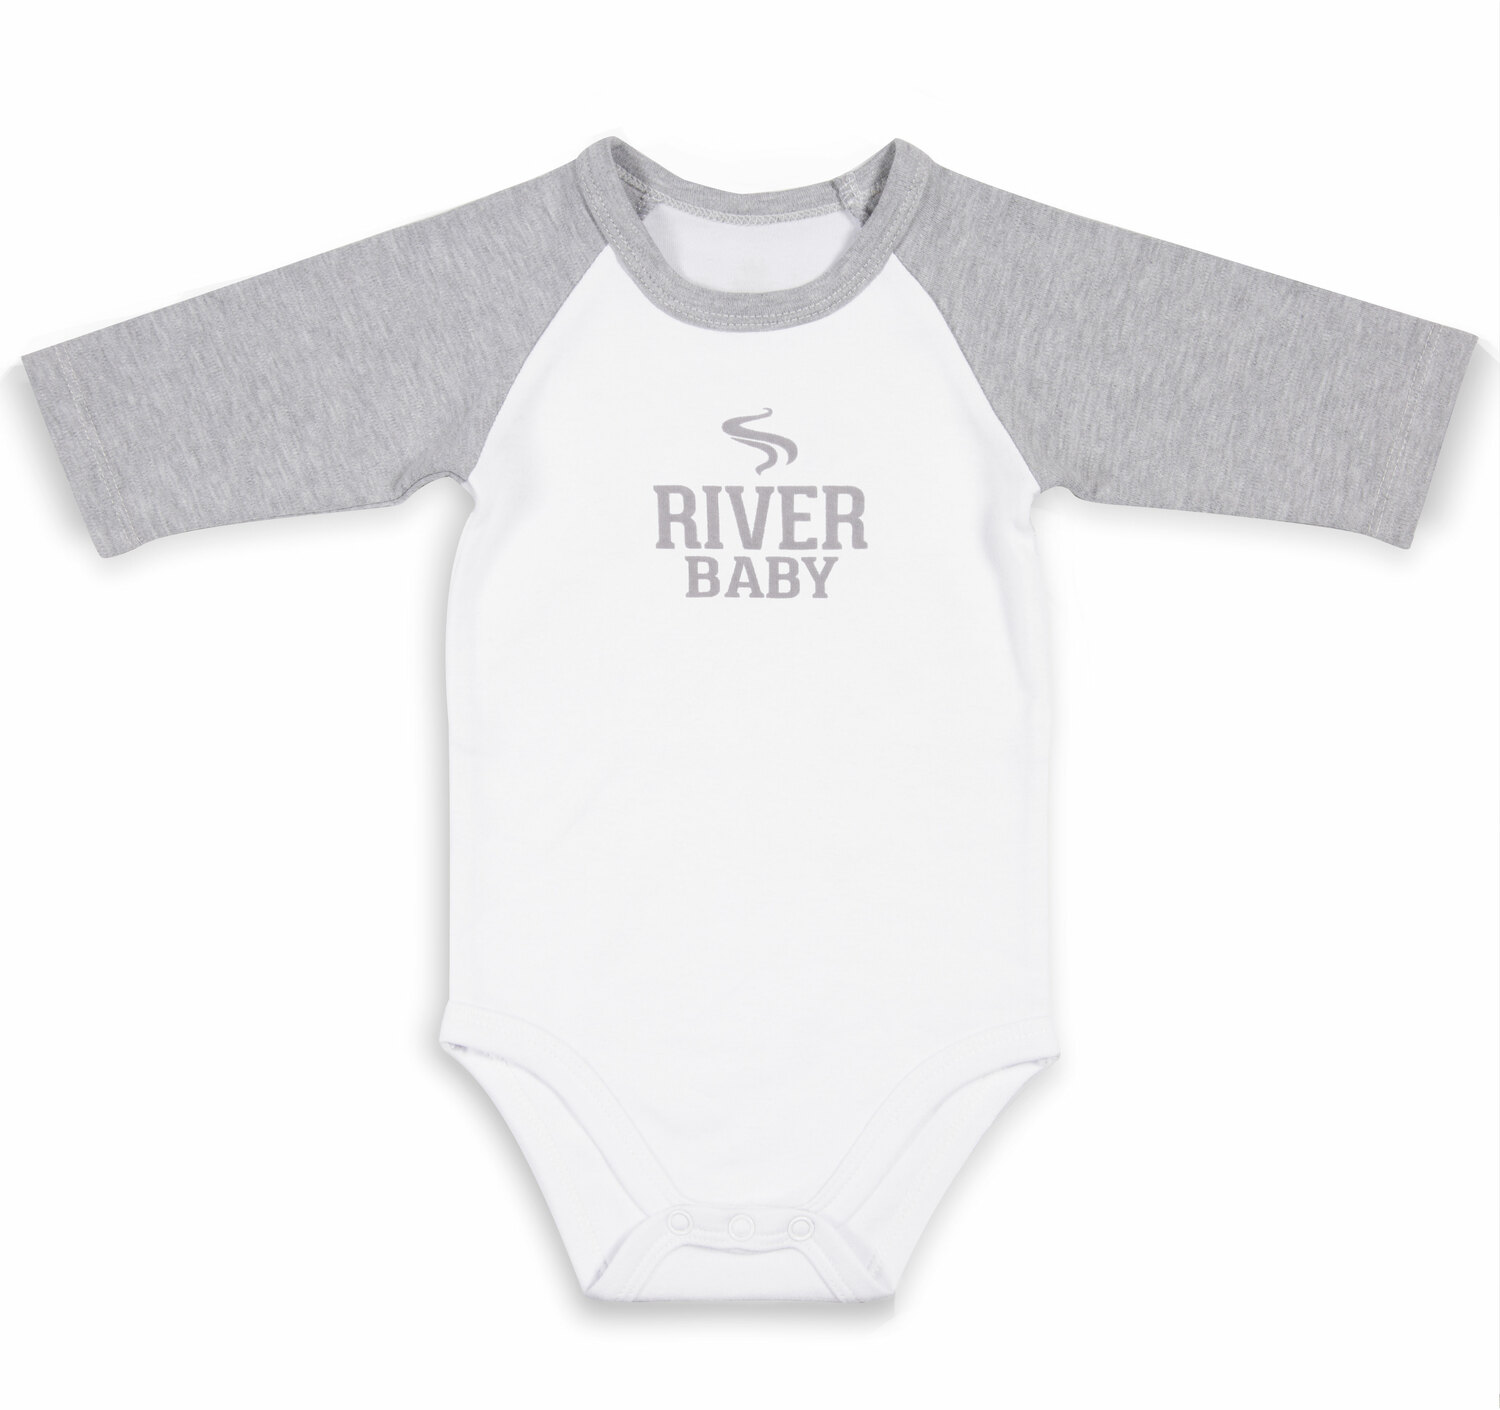 River Baby by We Baby - River Baby - 6-12 Months 3/4 Length Heather Gray Sleeve Onesie